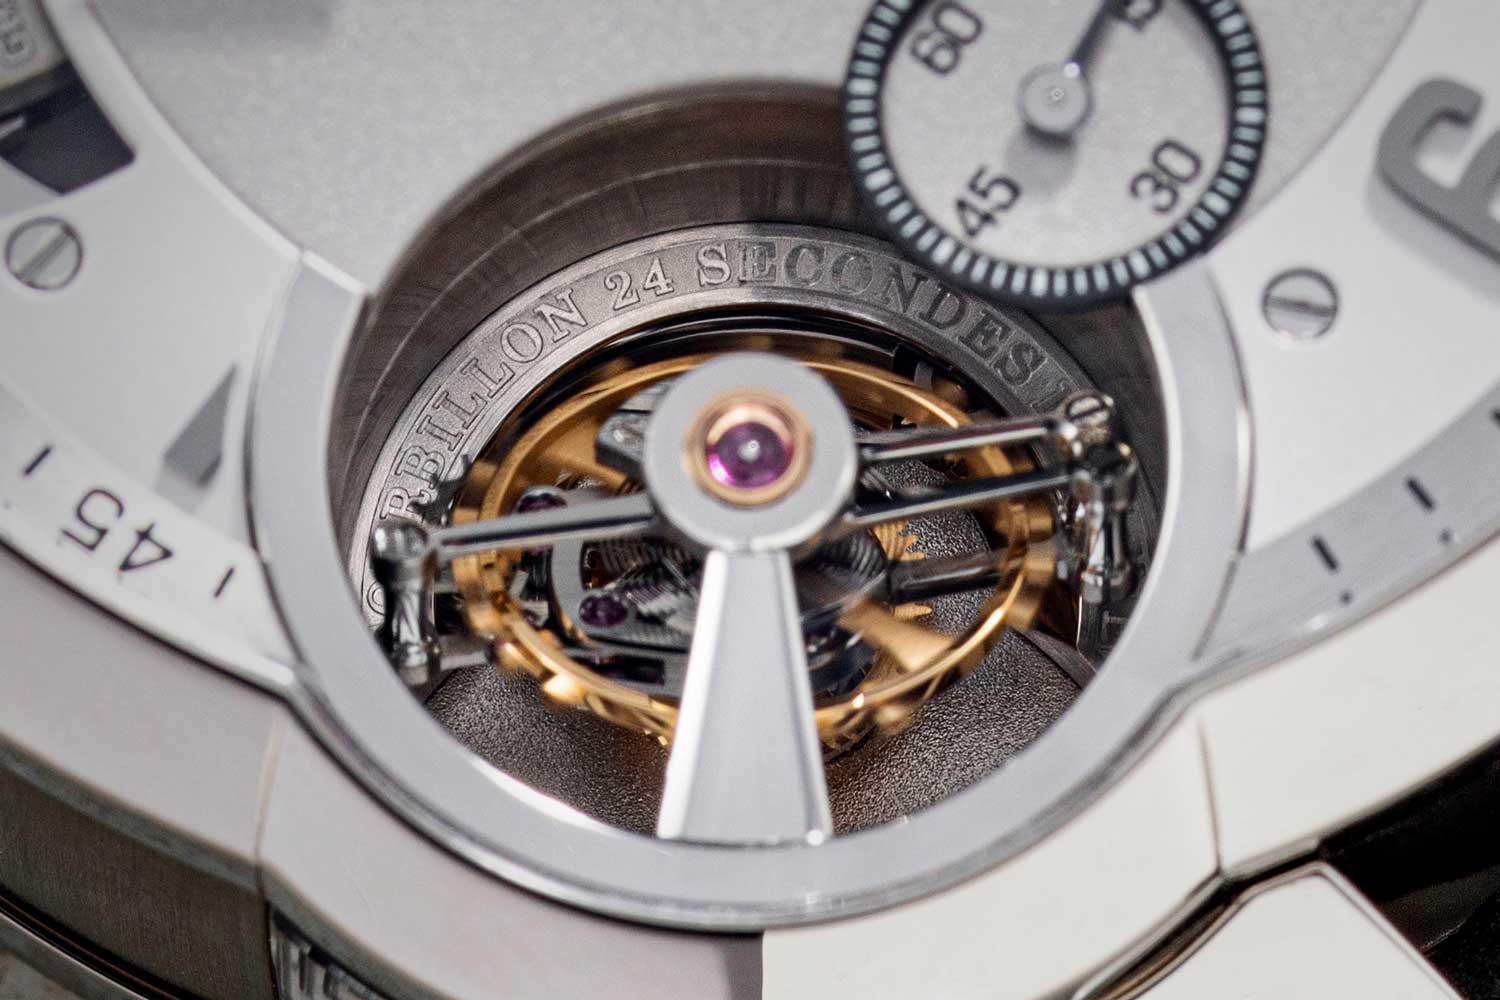 The fast-rotating, 25° inclined tourbillon (Image: Revolution©)